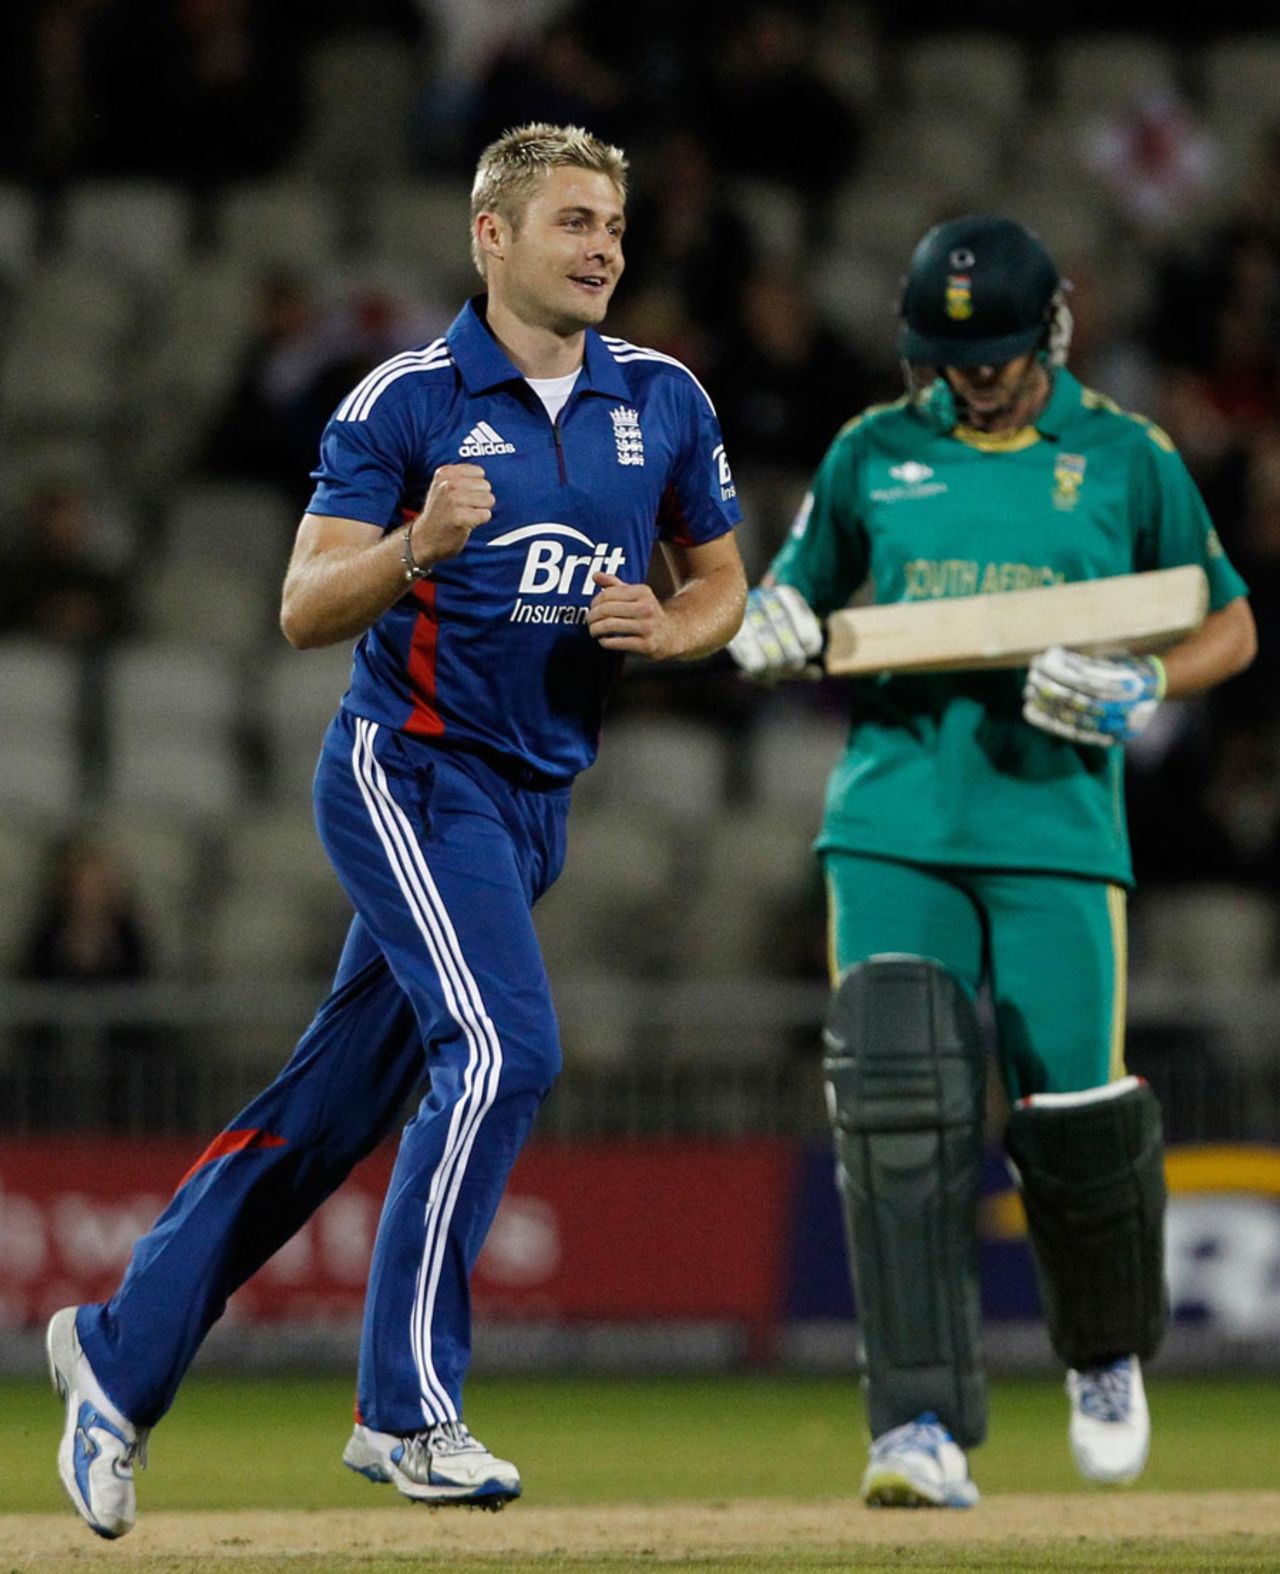 Luke Wright celebrates taking a wicket on his return to international cricket, England v South Africa, 2nd NatWest T20I, Old Trafford, September 10, 2012